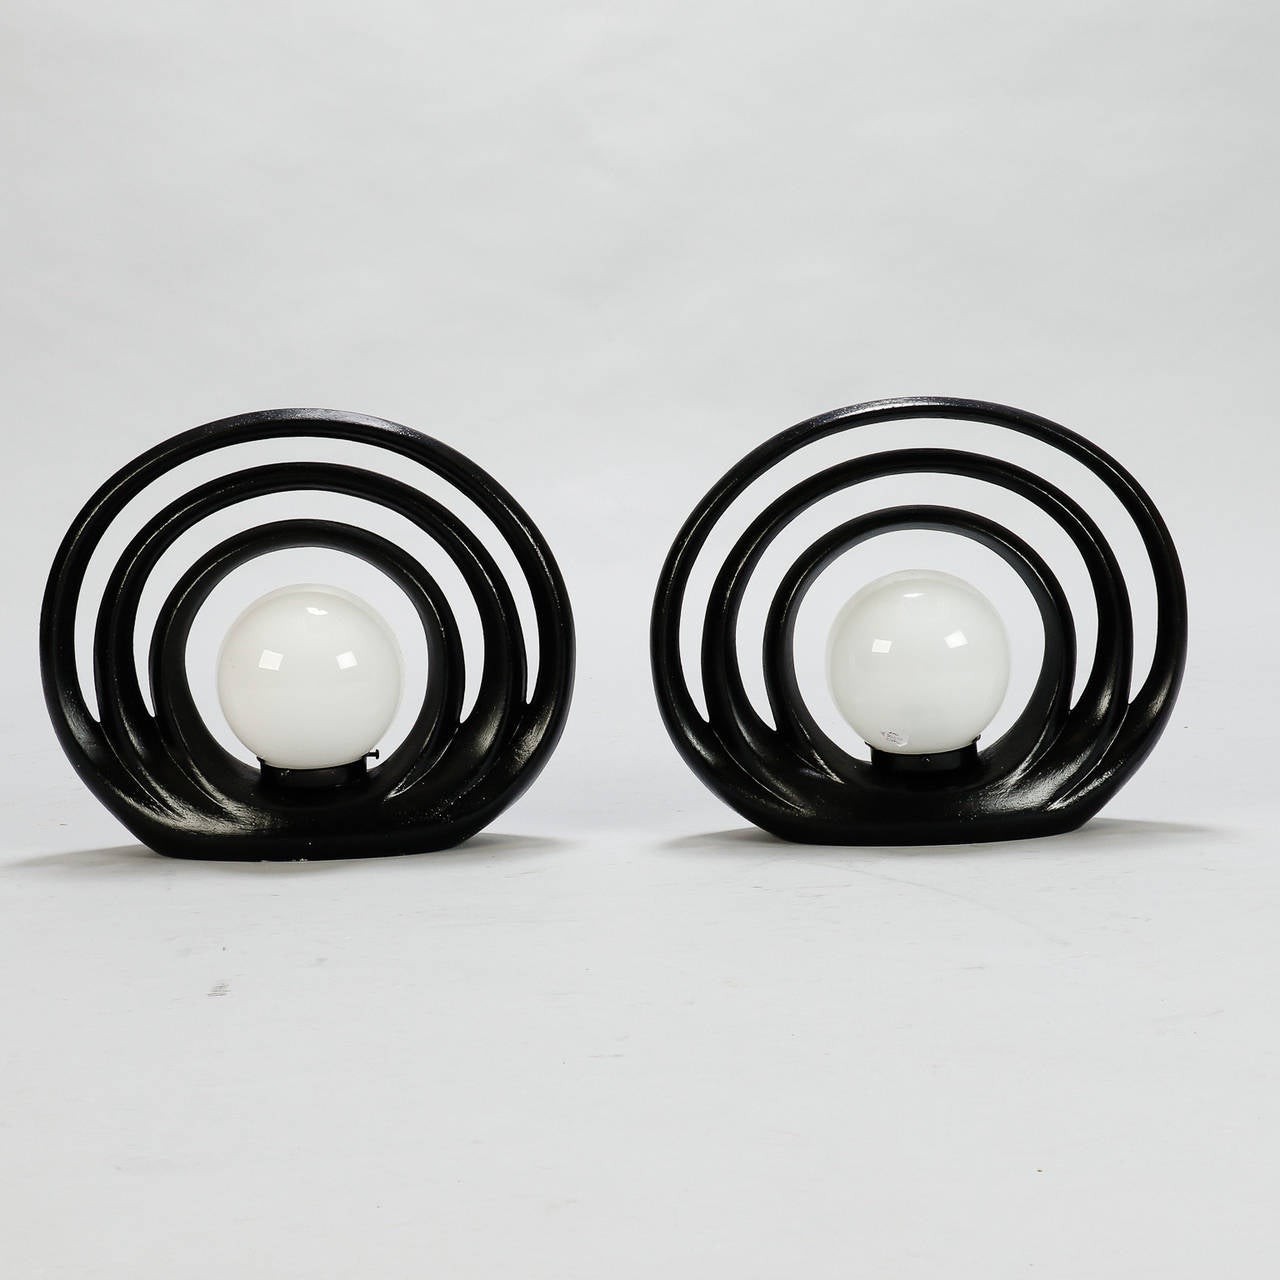 Pair circa 1970s Italian mod Op Art table lamps with three black ceramic concentric circles with a white glass globe in the center. New wiring for US electrical standards. Sold and priced as a pair. Excellent vintage condition with no flaws found.